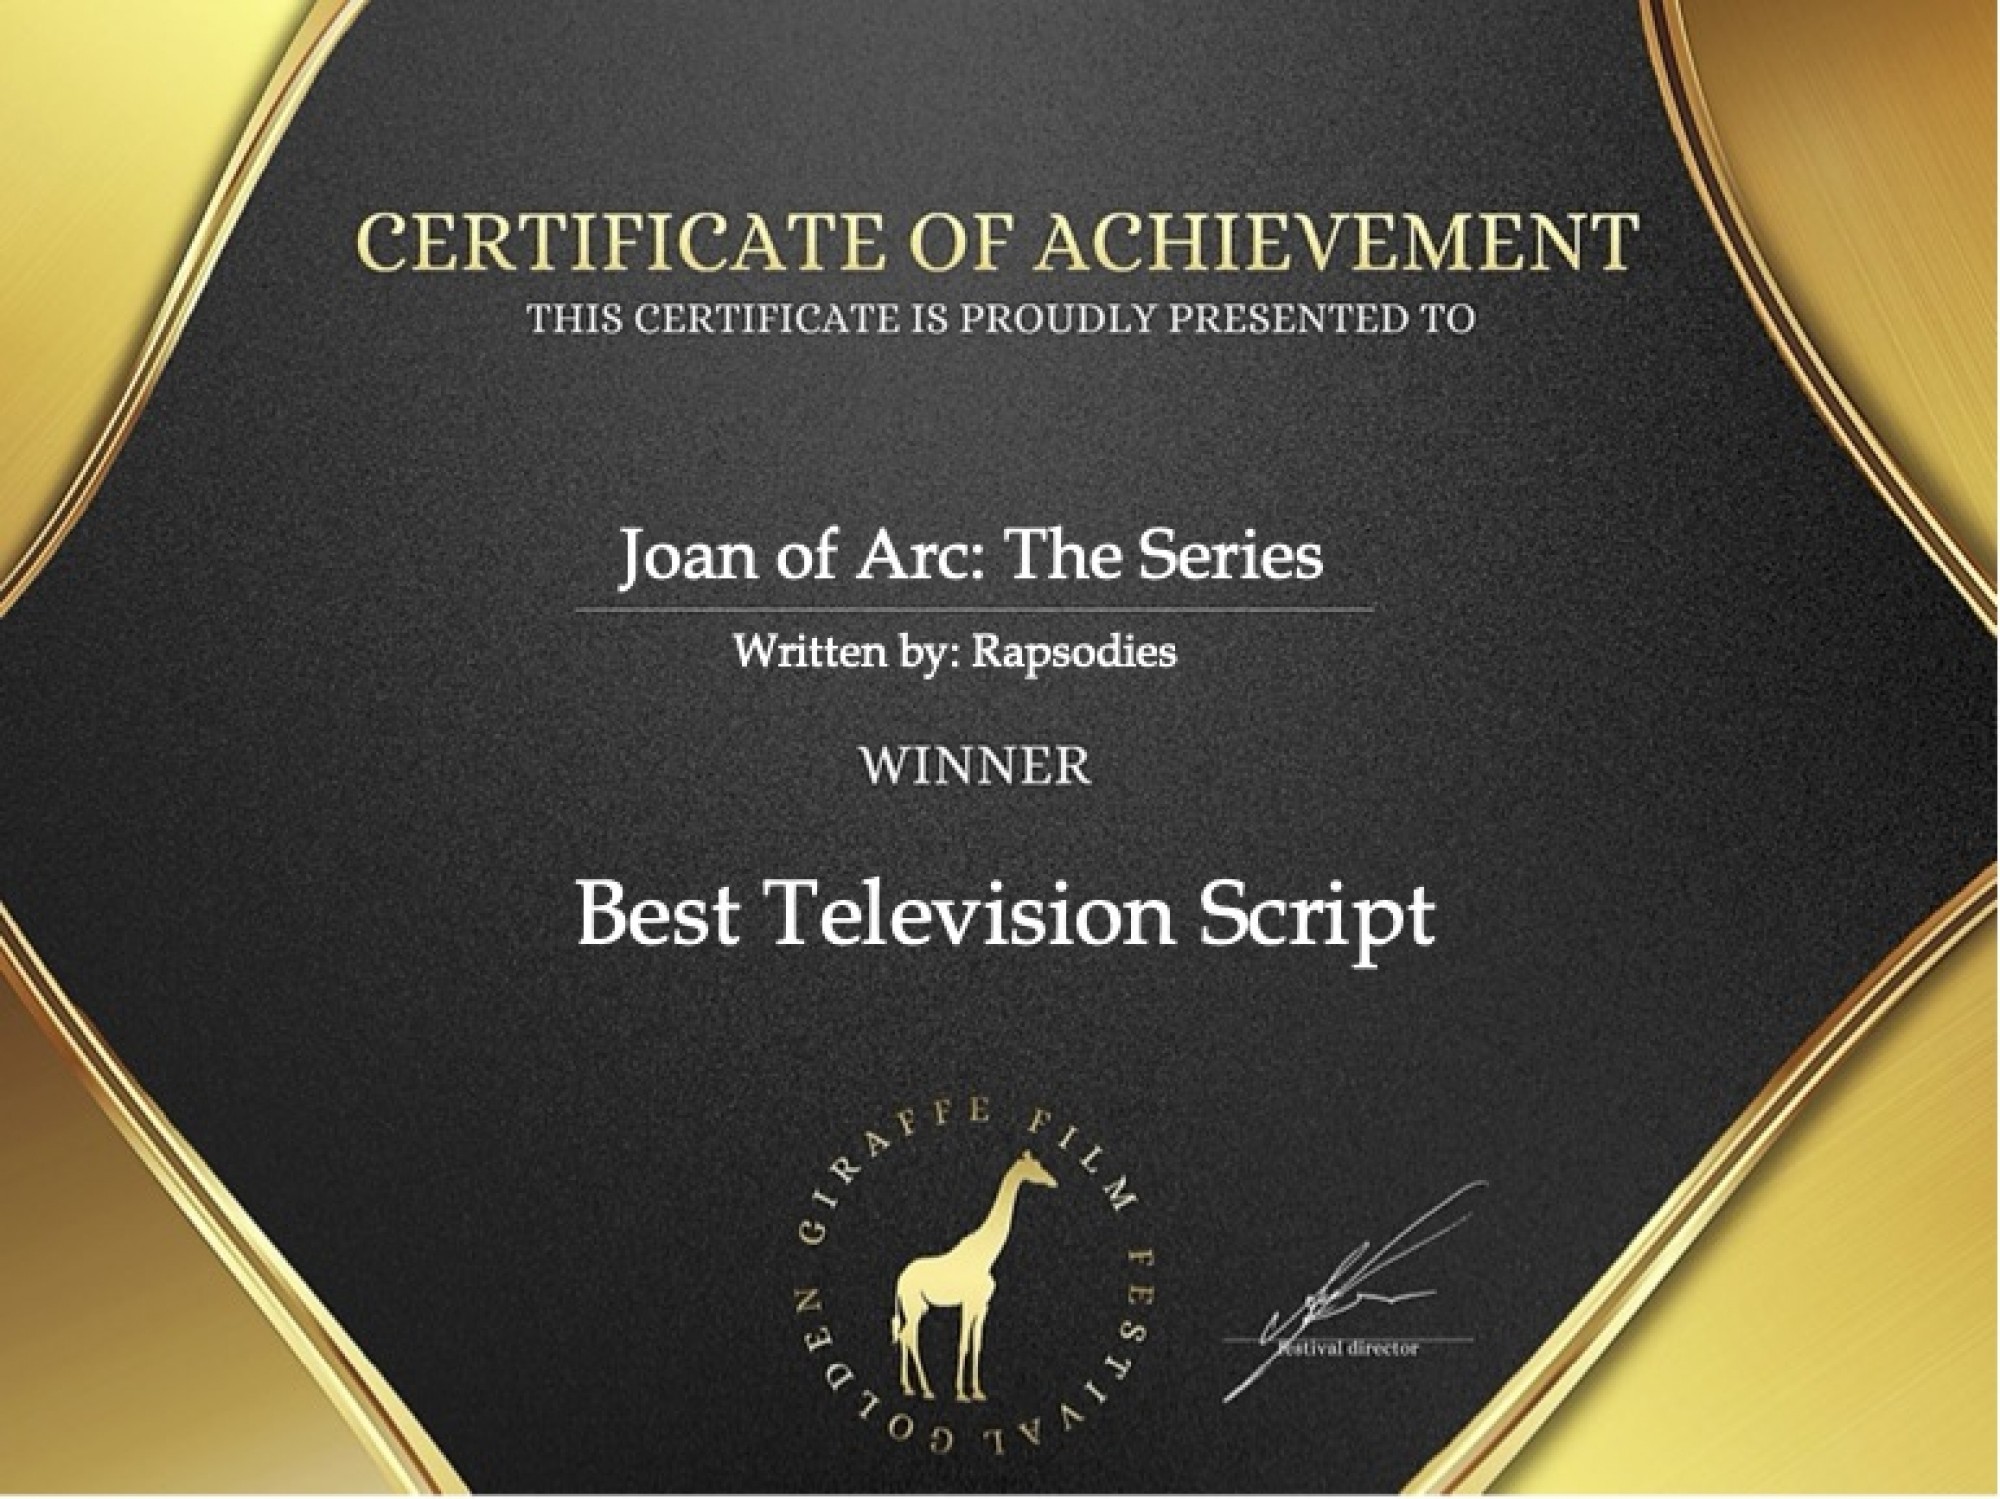 Joan of Arc: The series - Best Television Script